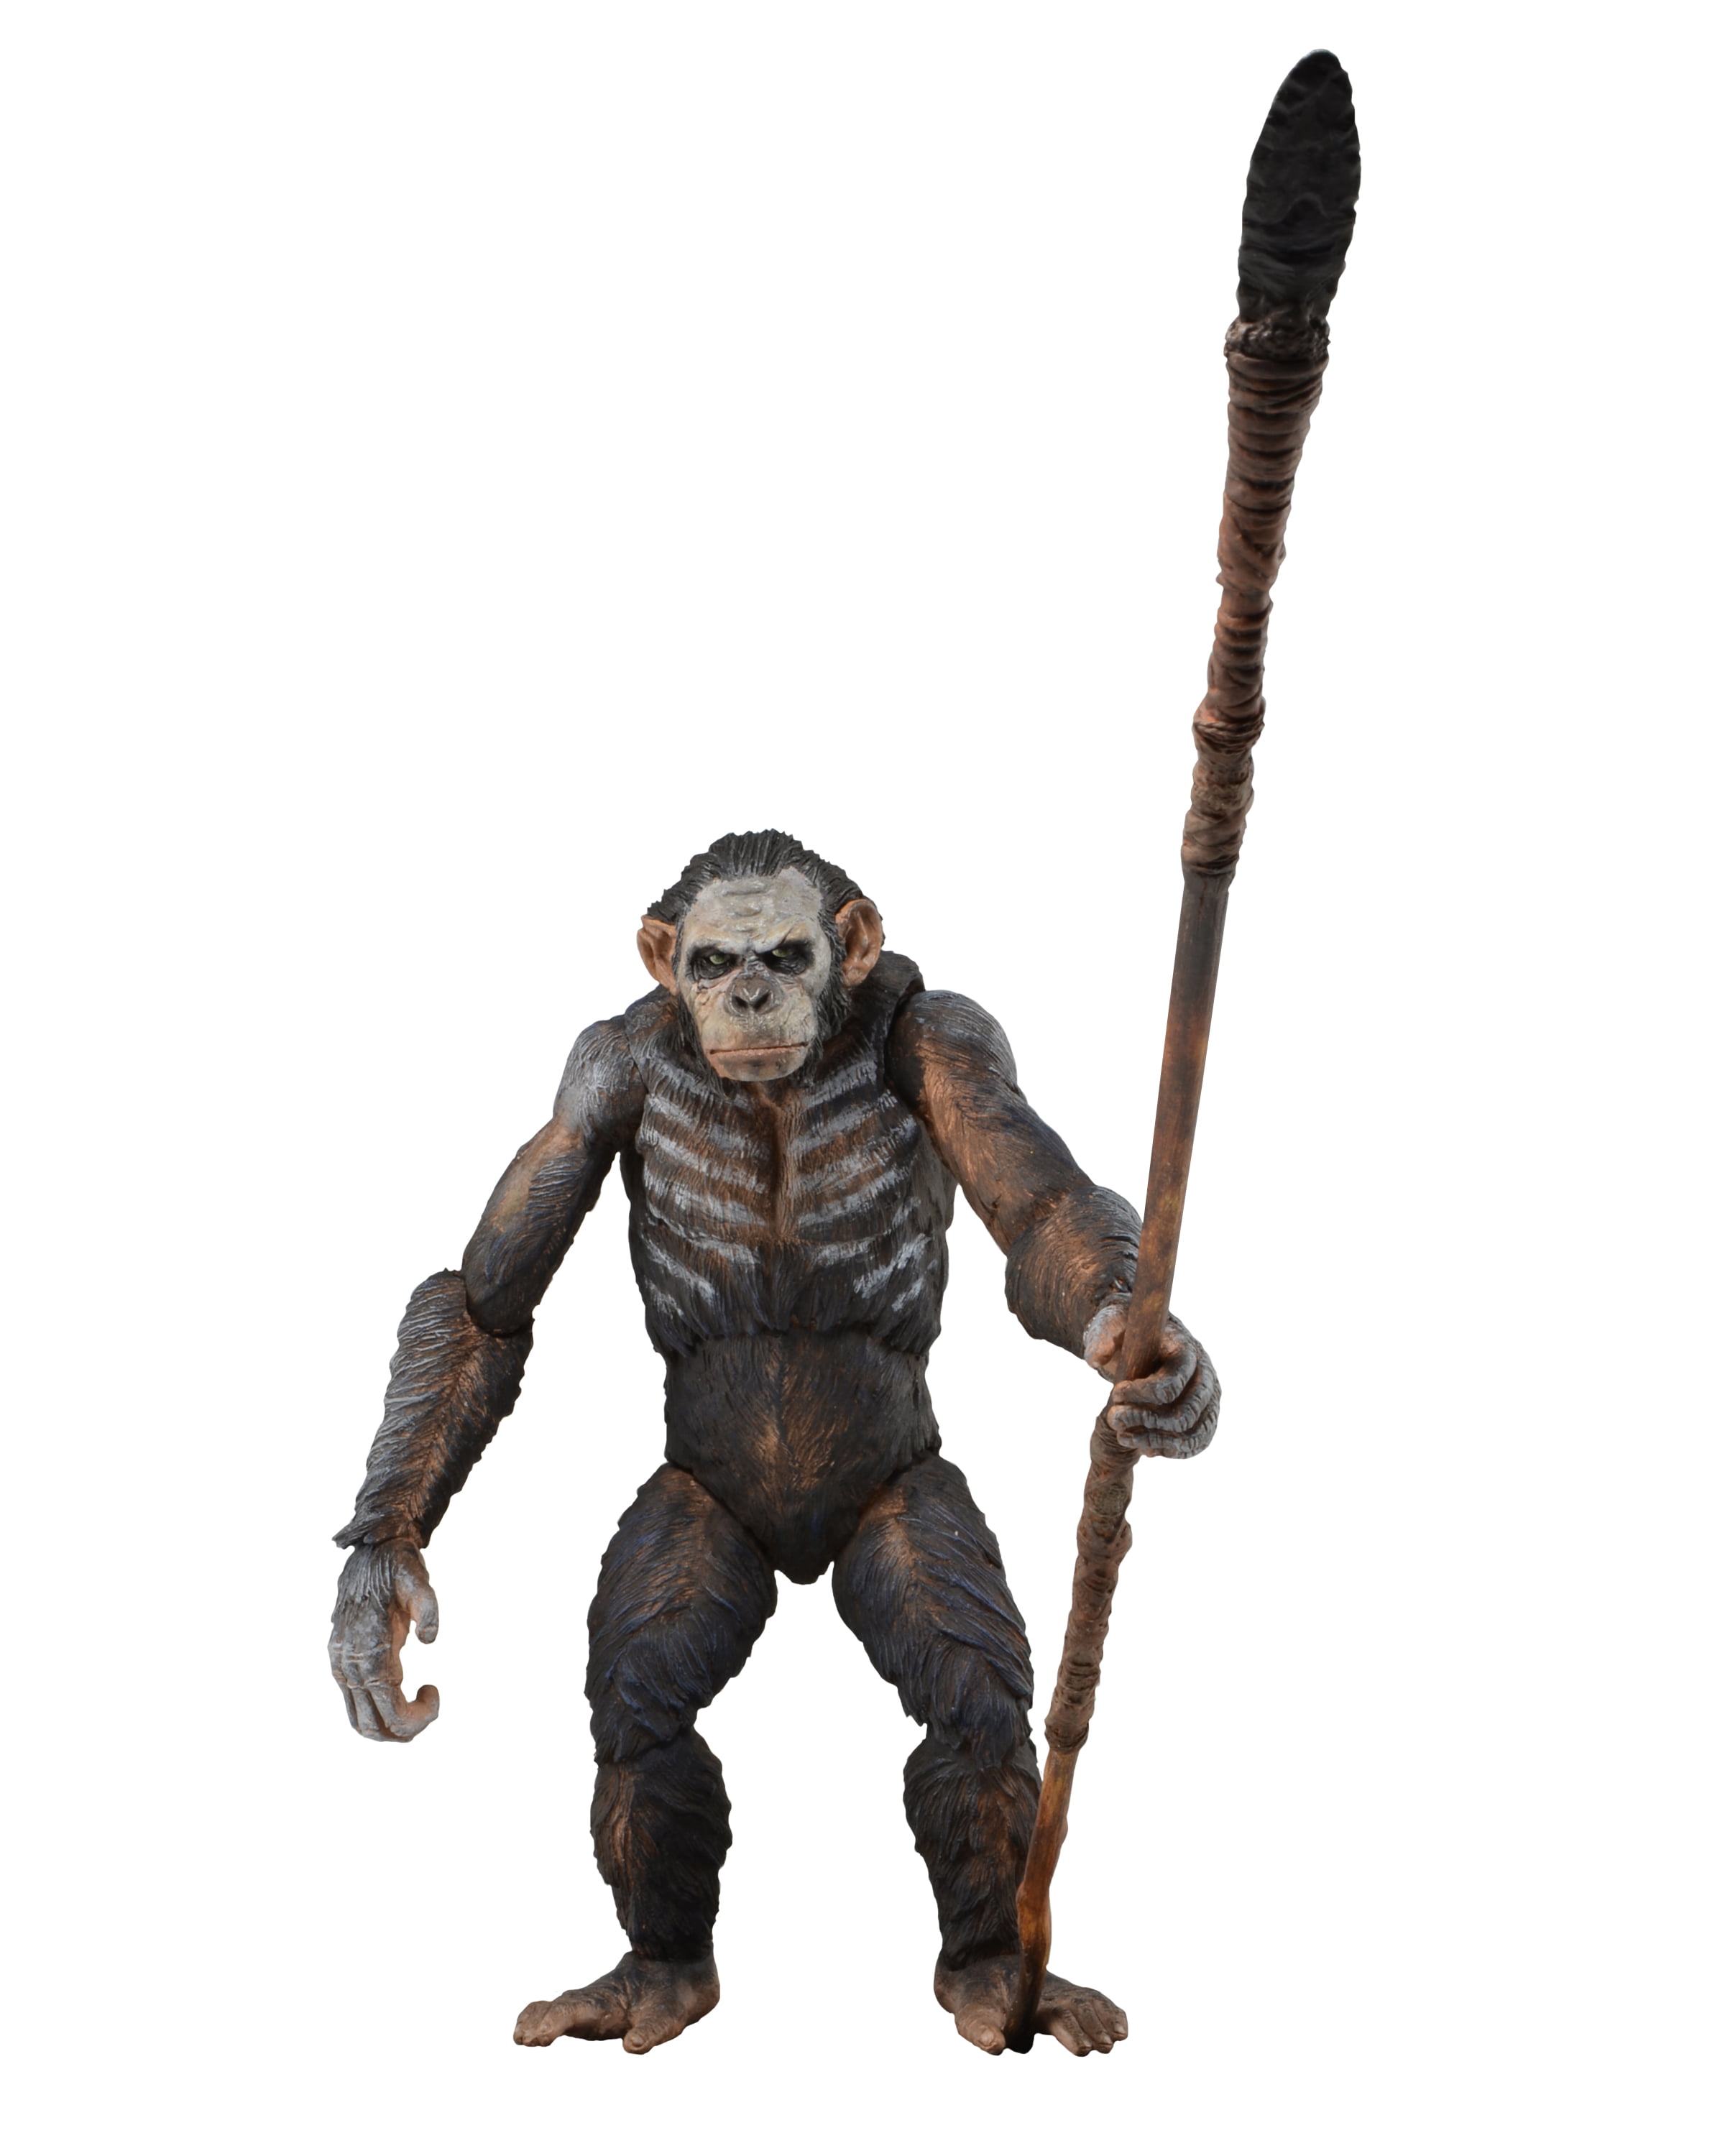 Koba 6" Action Figure NEW SEALED IN BOX NECA Dawn Planet Of The Apes Series 1 